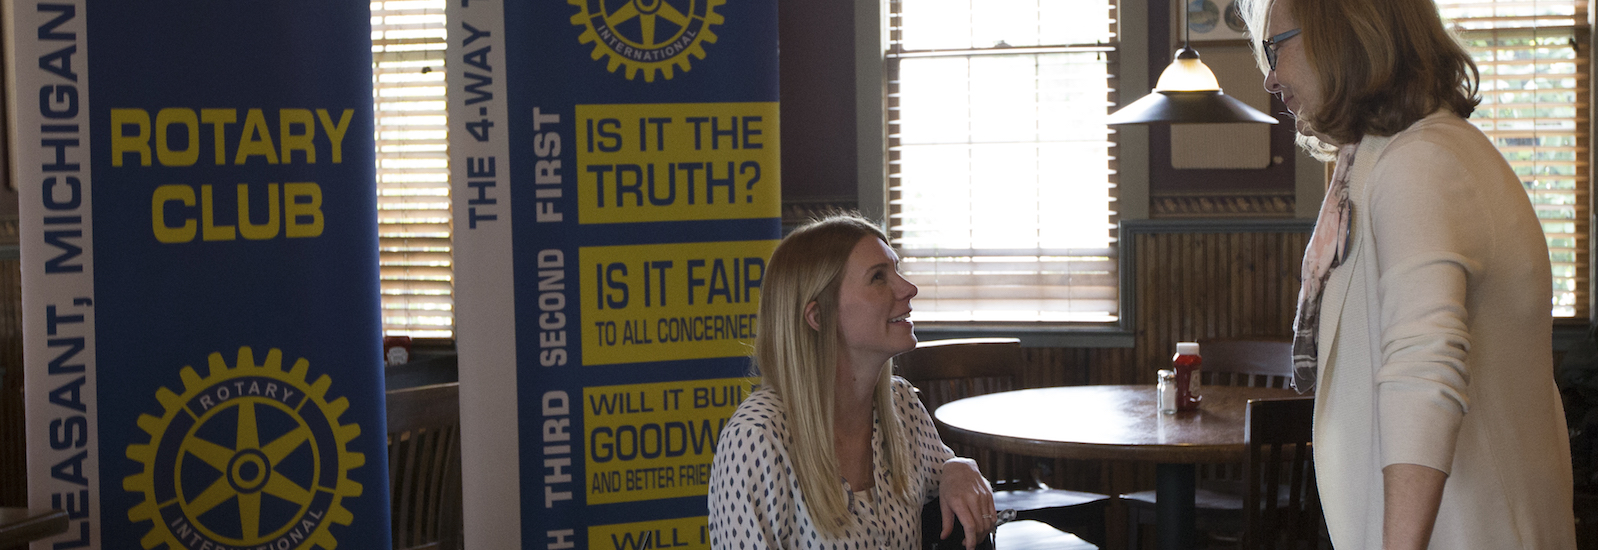 Mt. Pleasant Rotary Club President Alysha Fisher and Peggy Pickler chat prior to the club's meeting at Mountain Town Station on Monday, Oct. 8, 2018.